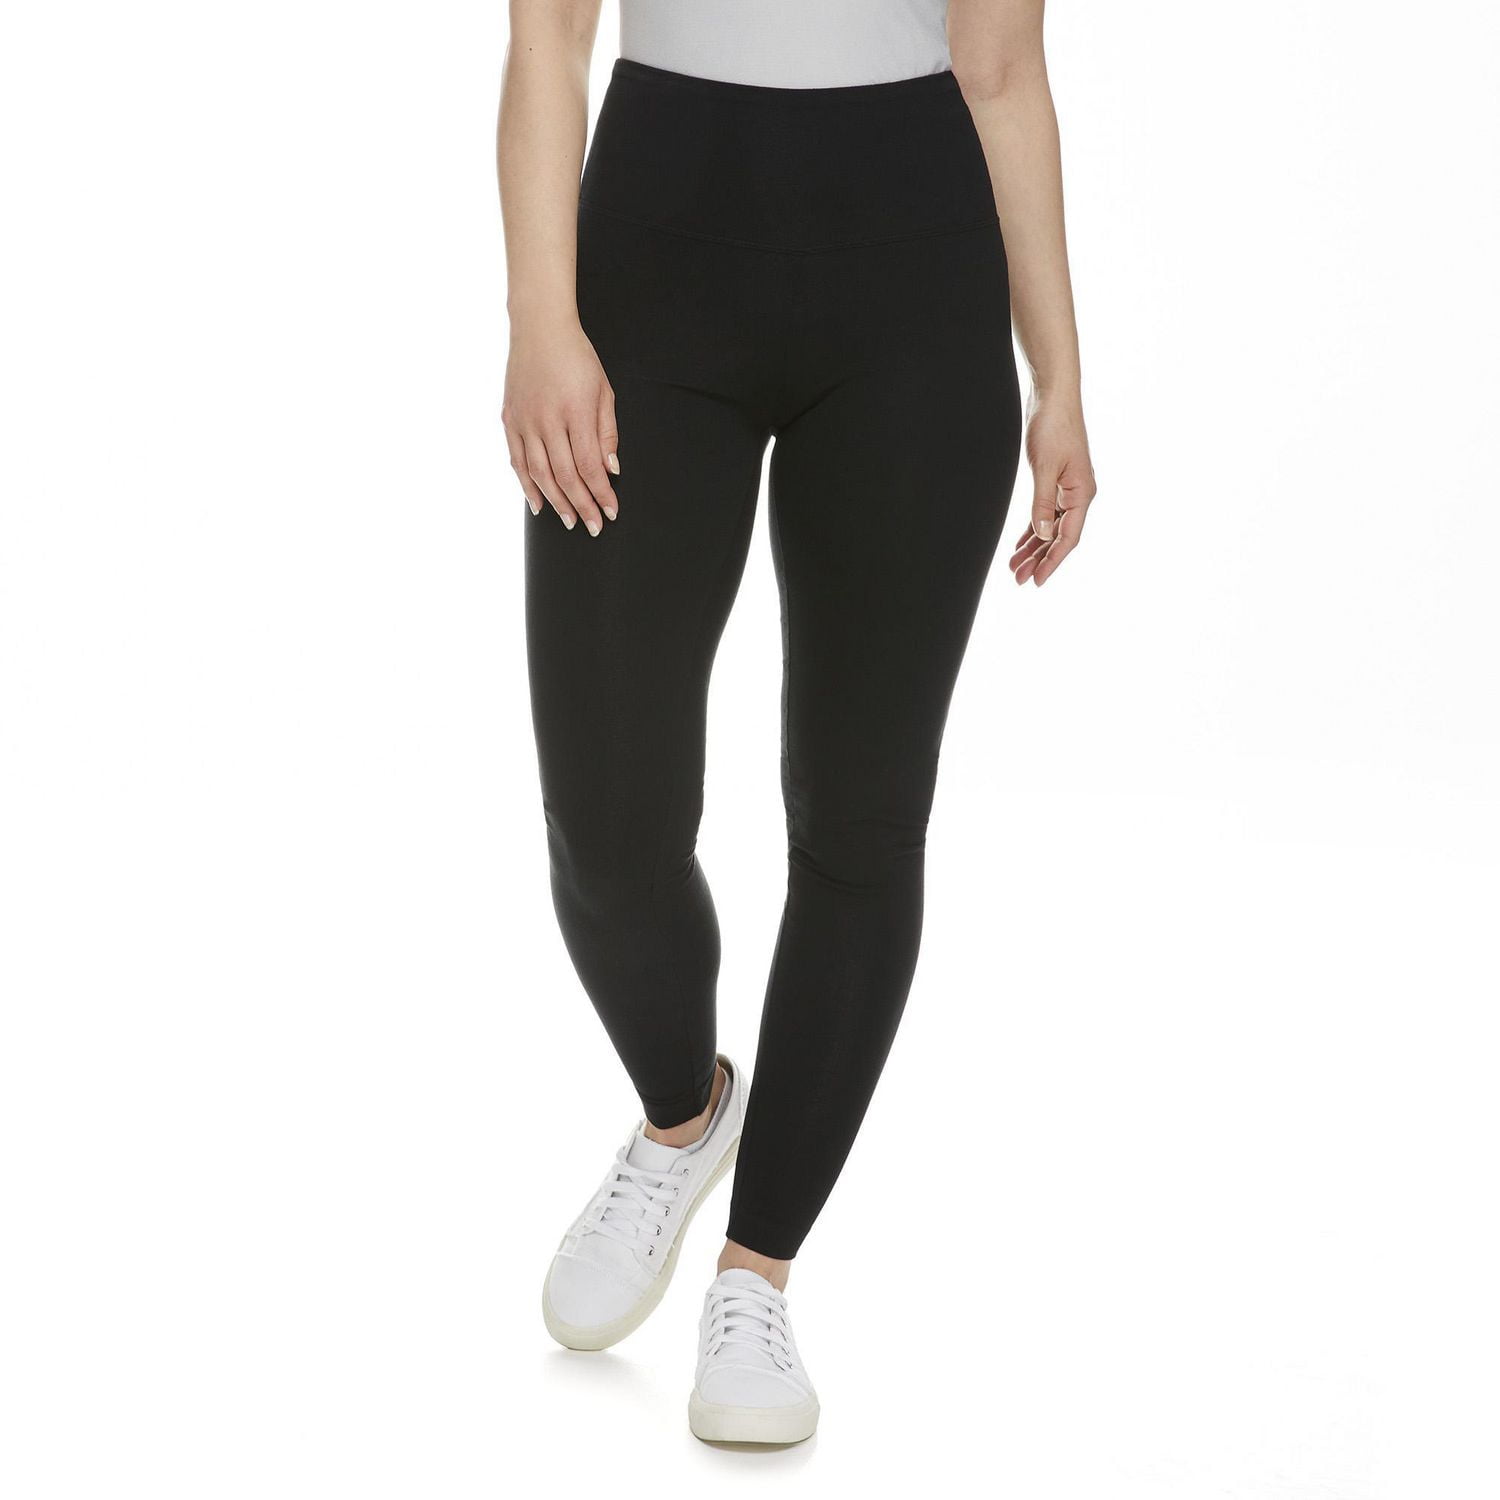 Buy Peach Cotton Jersey Tights Online - W for Woman